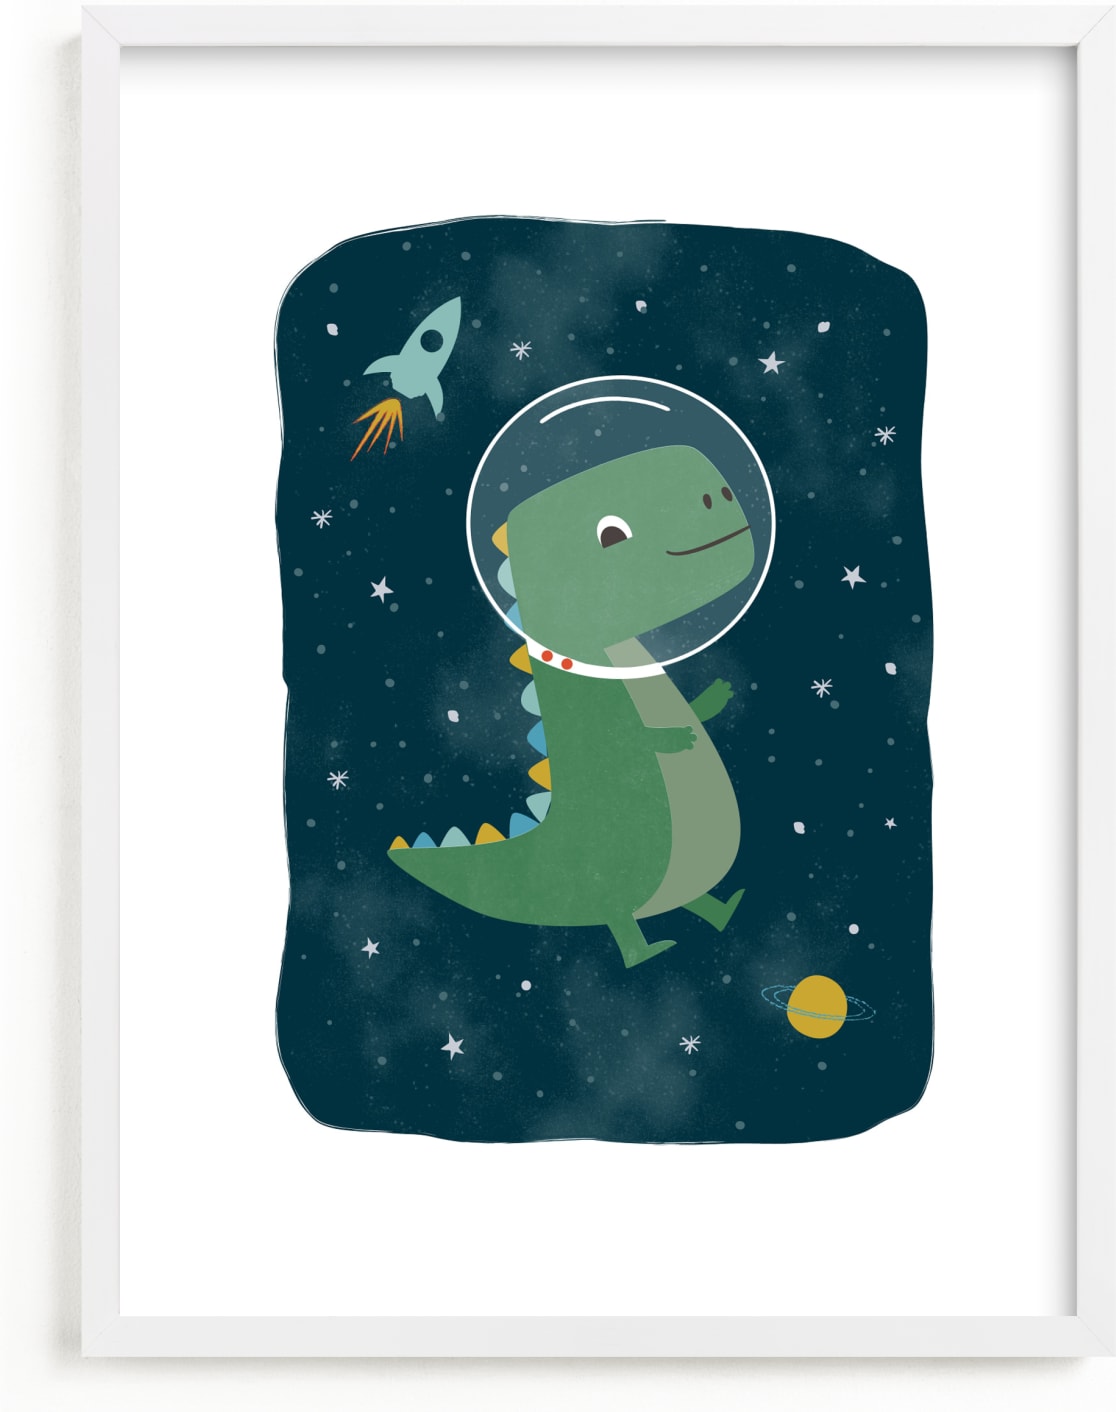 This is a colorful art by Annie Holmquist called Dinos in space.